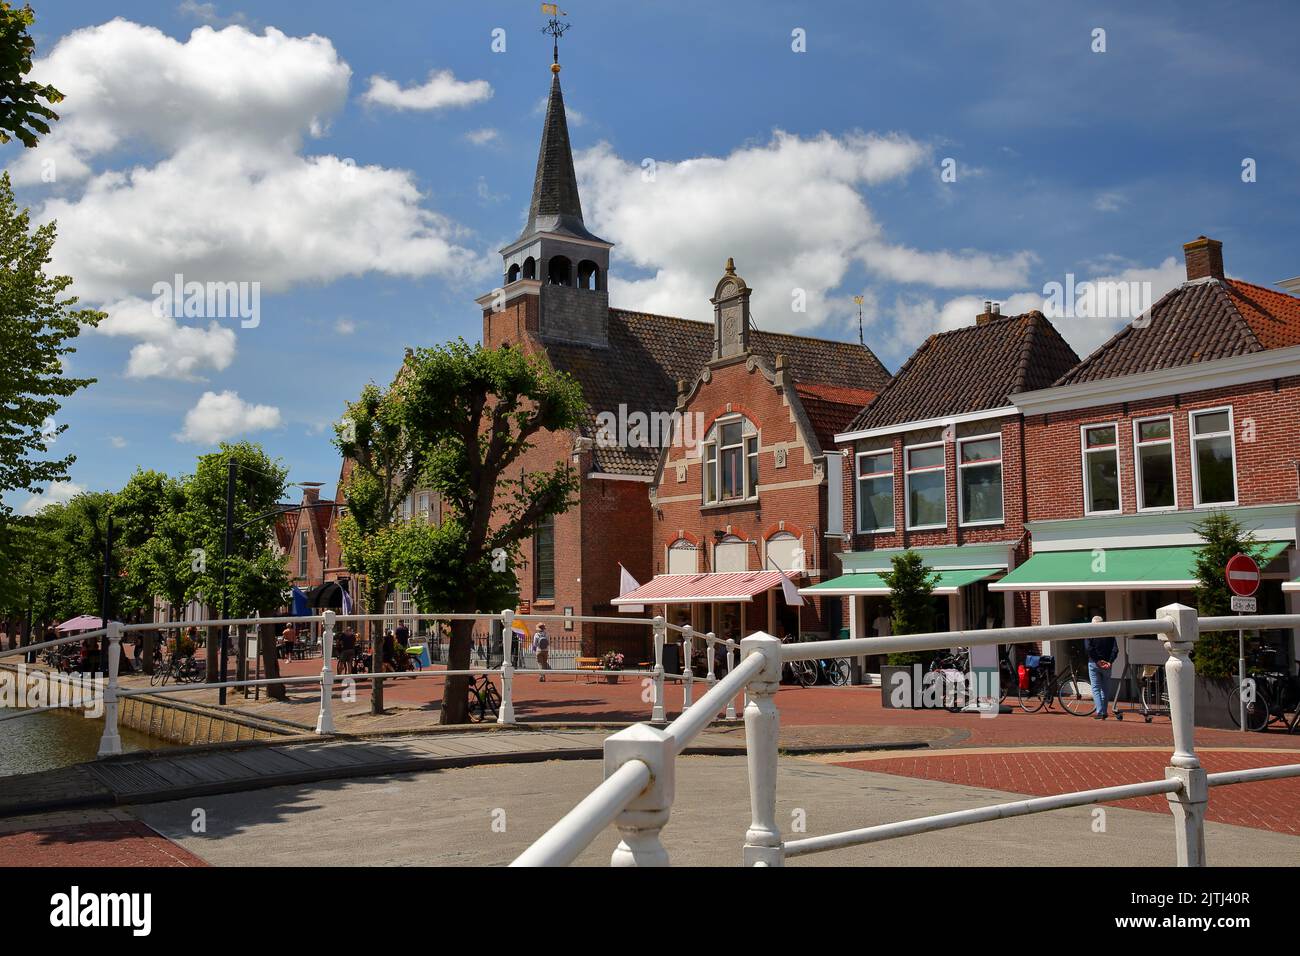 The historical center of Balk, Friesland, Netherlands, with historic houses, bridges, canals and Breahus church Stock Photo